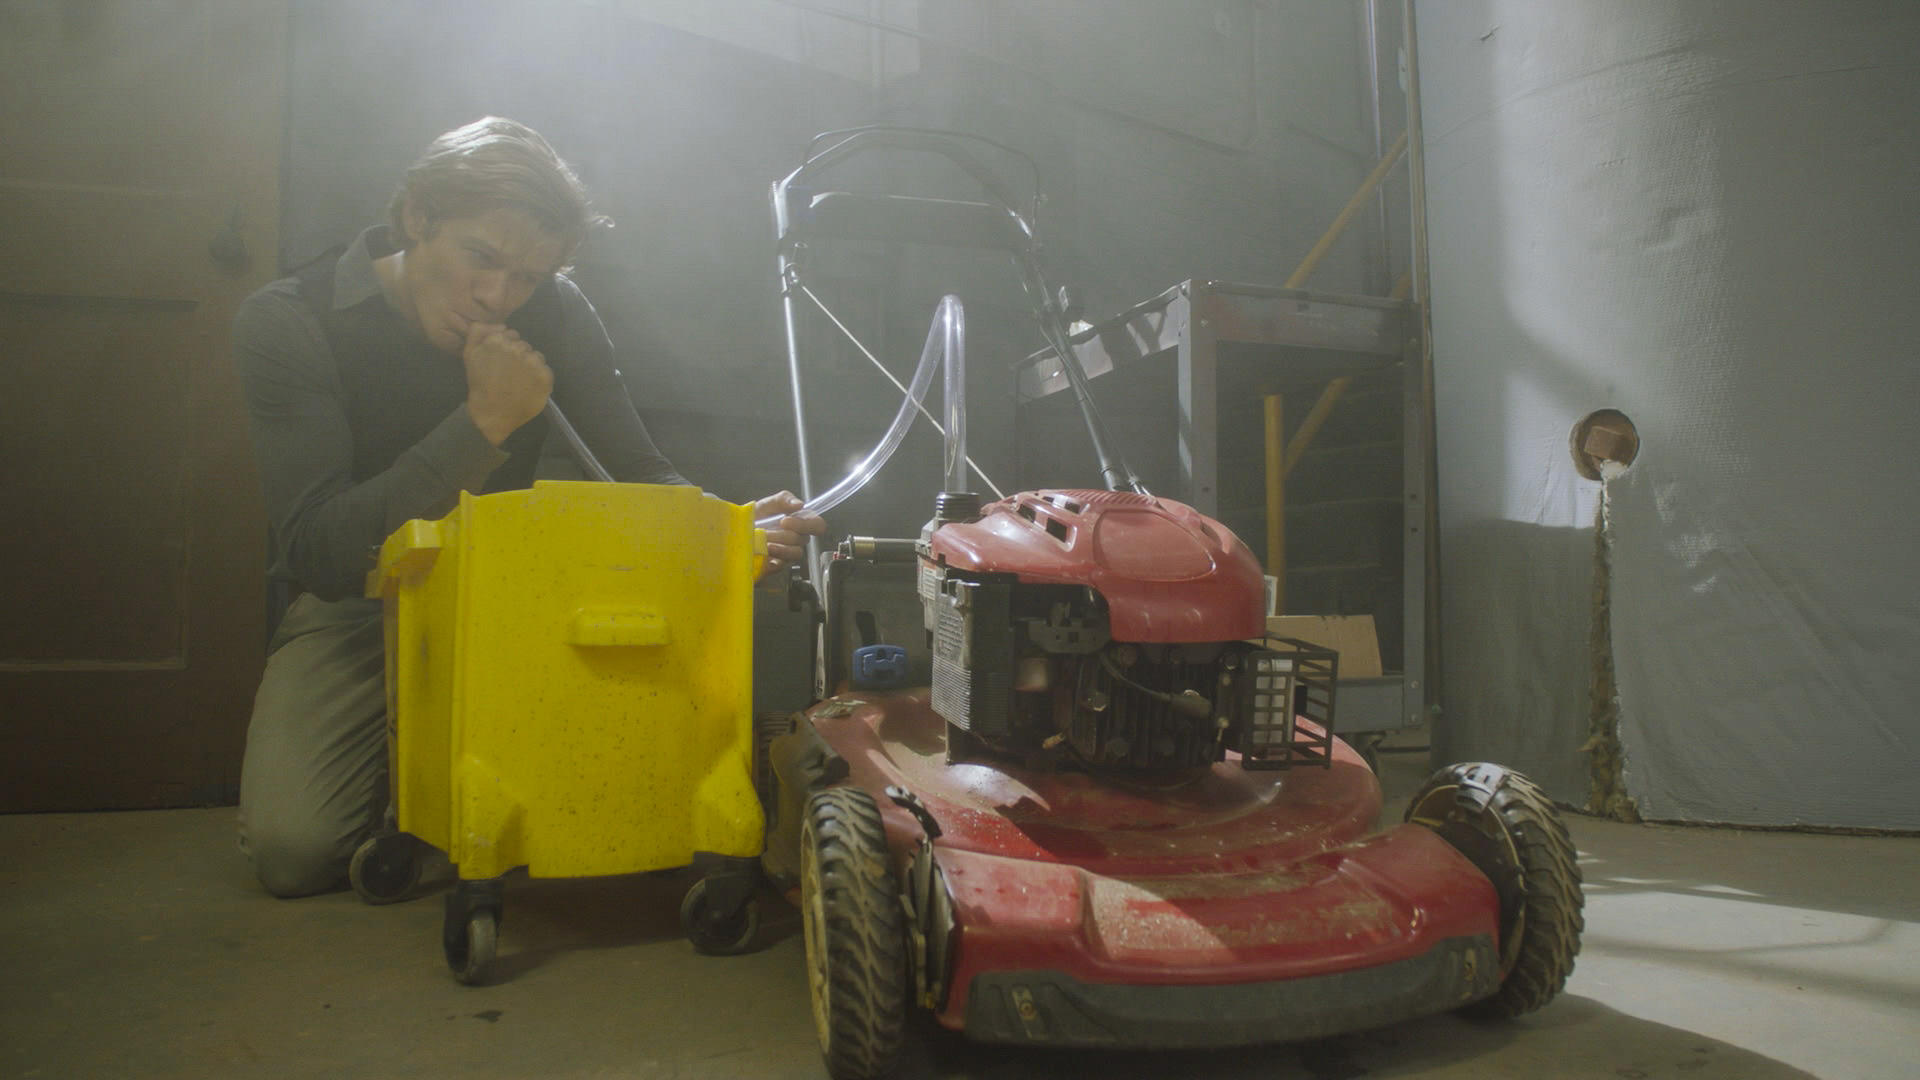 MacGyver finds a creative way to use an old lawnmower. 